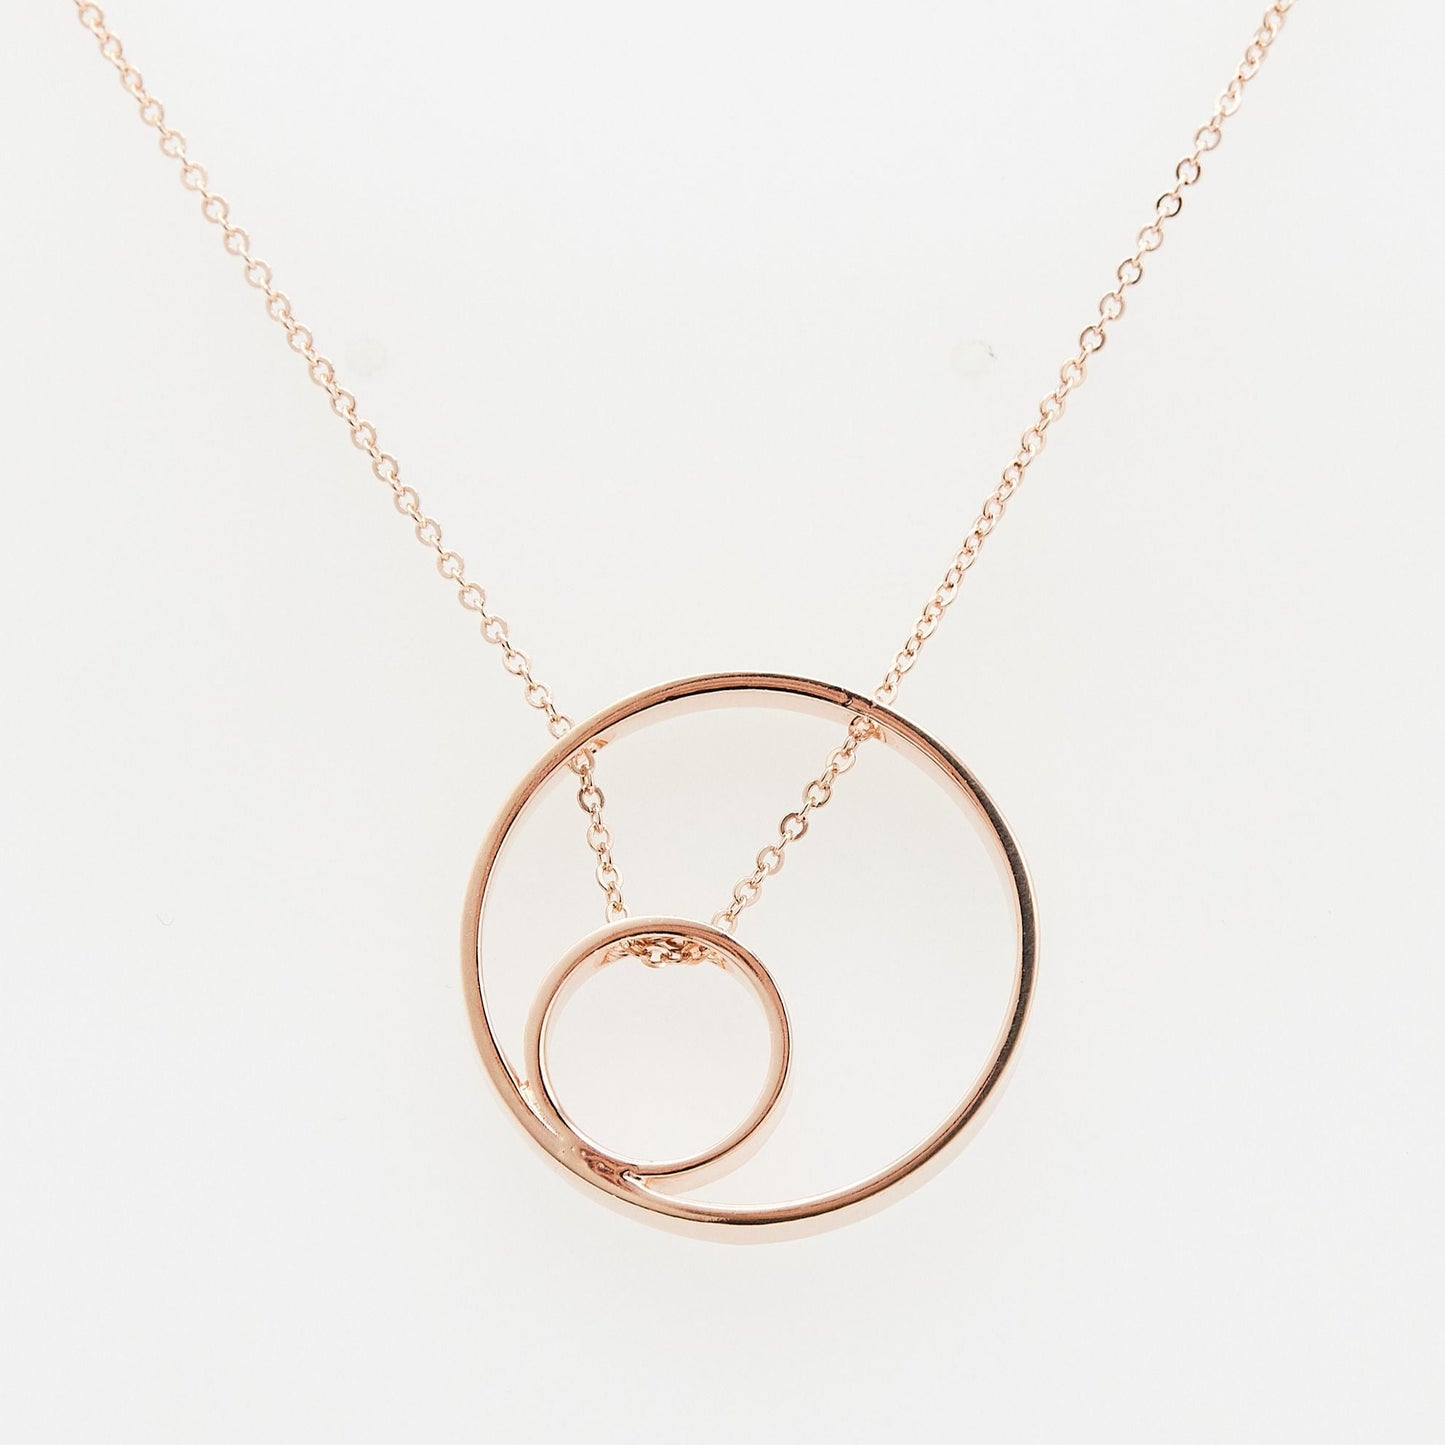 Load image into Gallery viewer, rose gold open circle pendant with small inner circle and chain threaded through on white background
